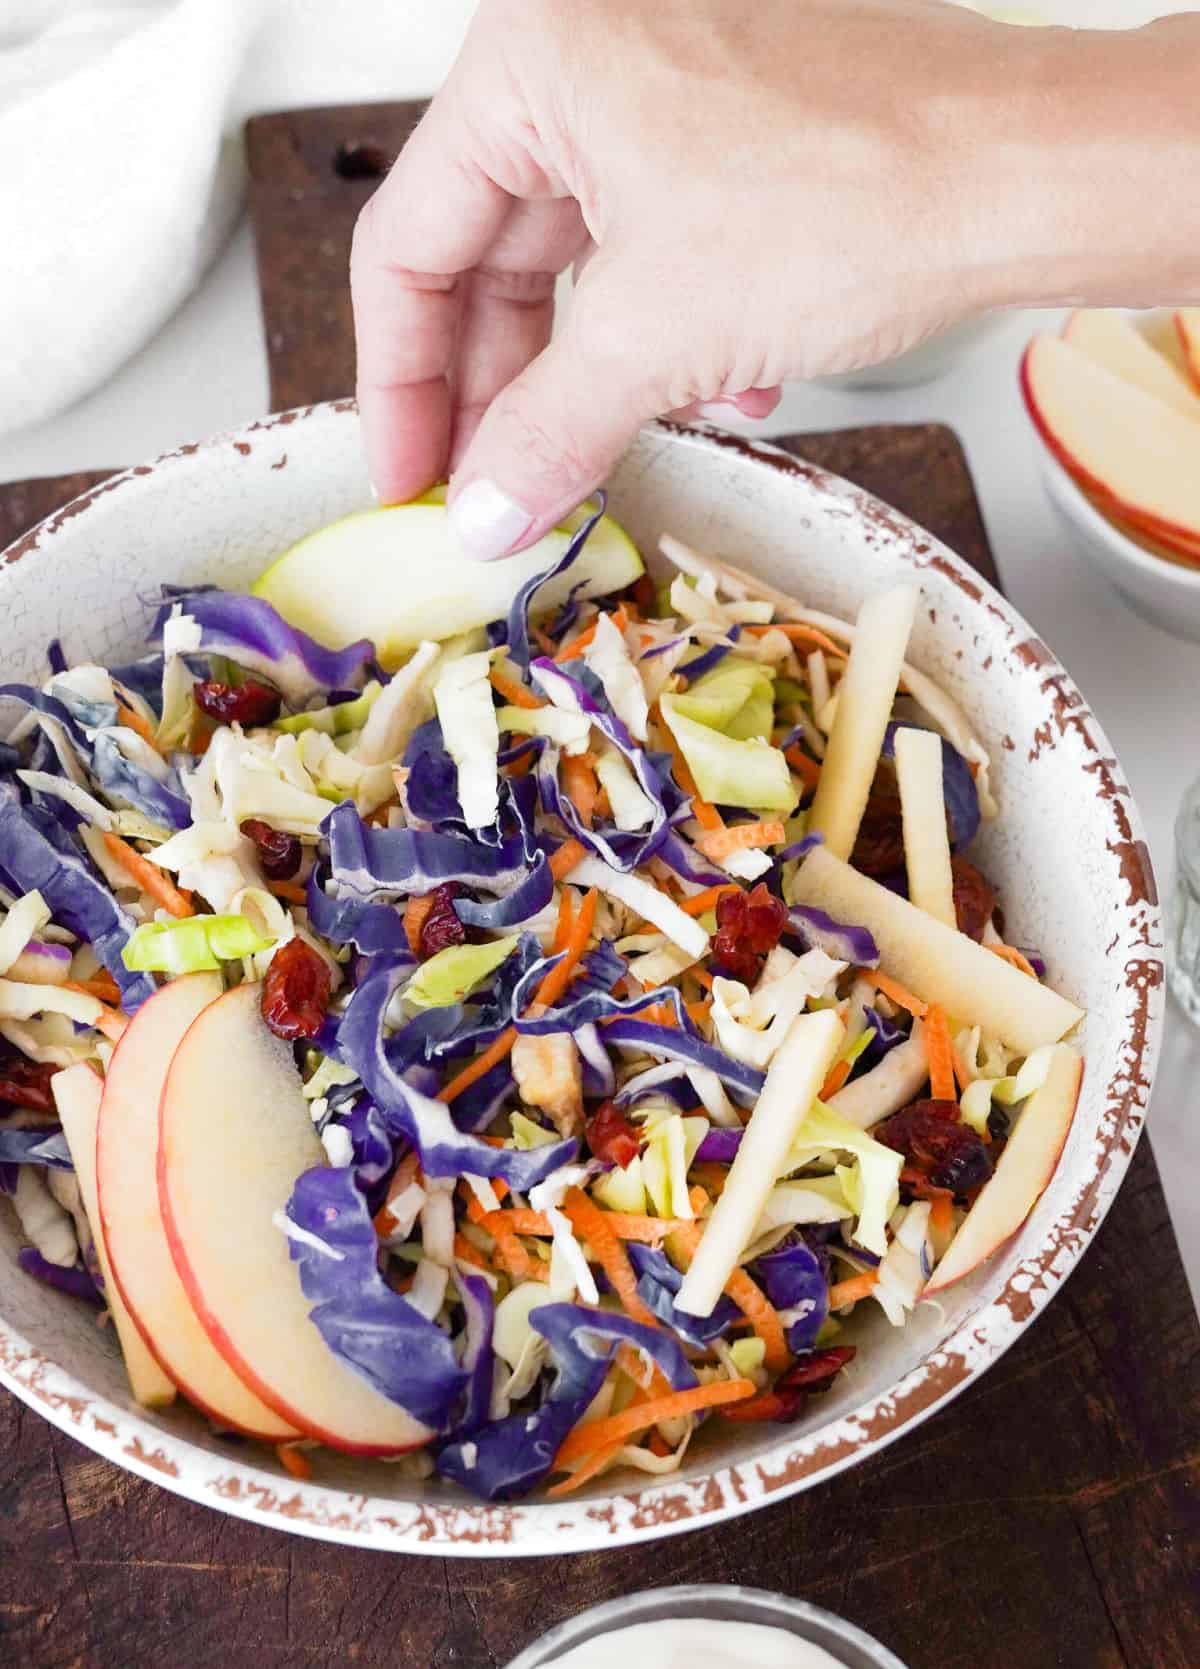 Placing apple slices on a white bowl with coleslaw on a dark wooden board.